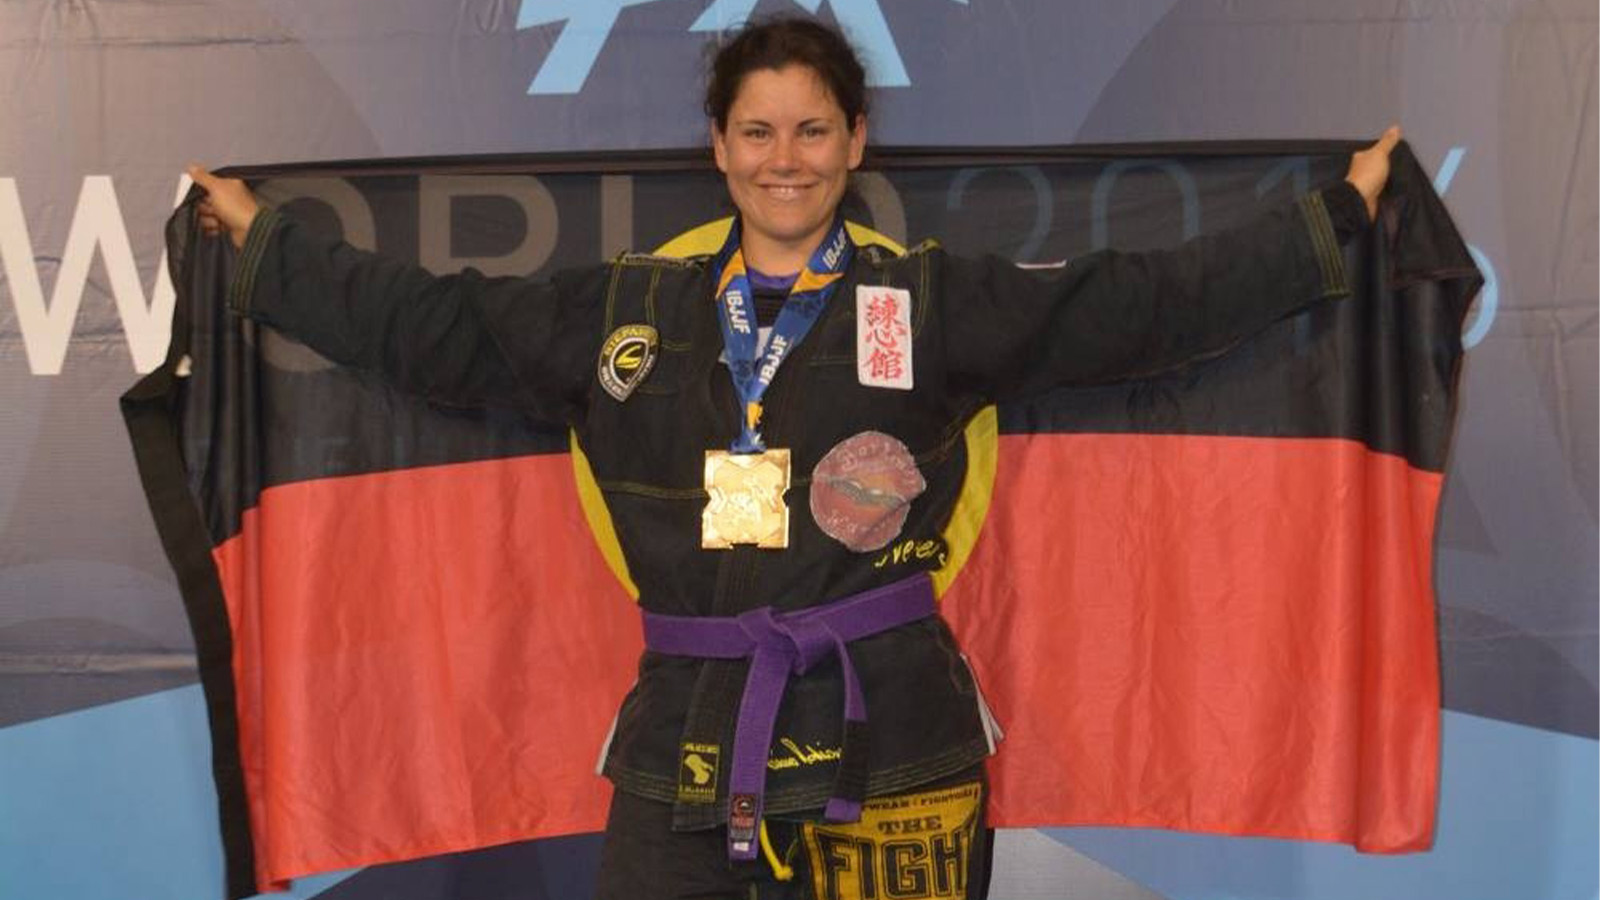 Shantelle Thompson is wearing a black jiu-jitsu uniform with a purple belt. She standing in front of a World Championships 2016 sign, smiling, holding an Aboriginal flag up behind her back.